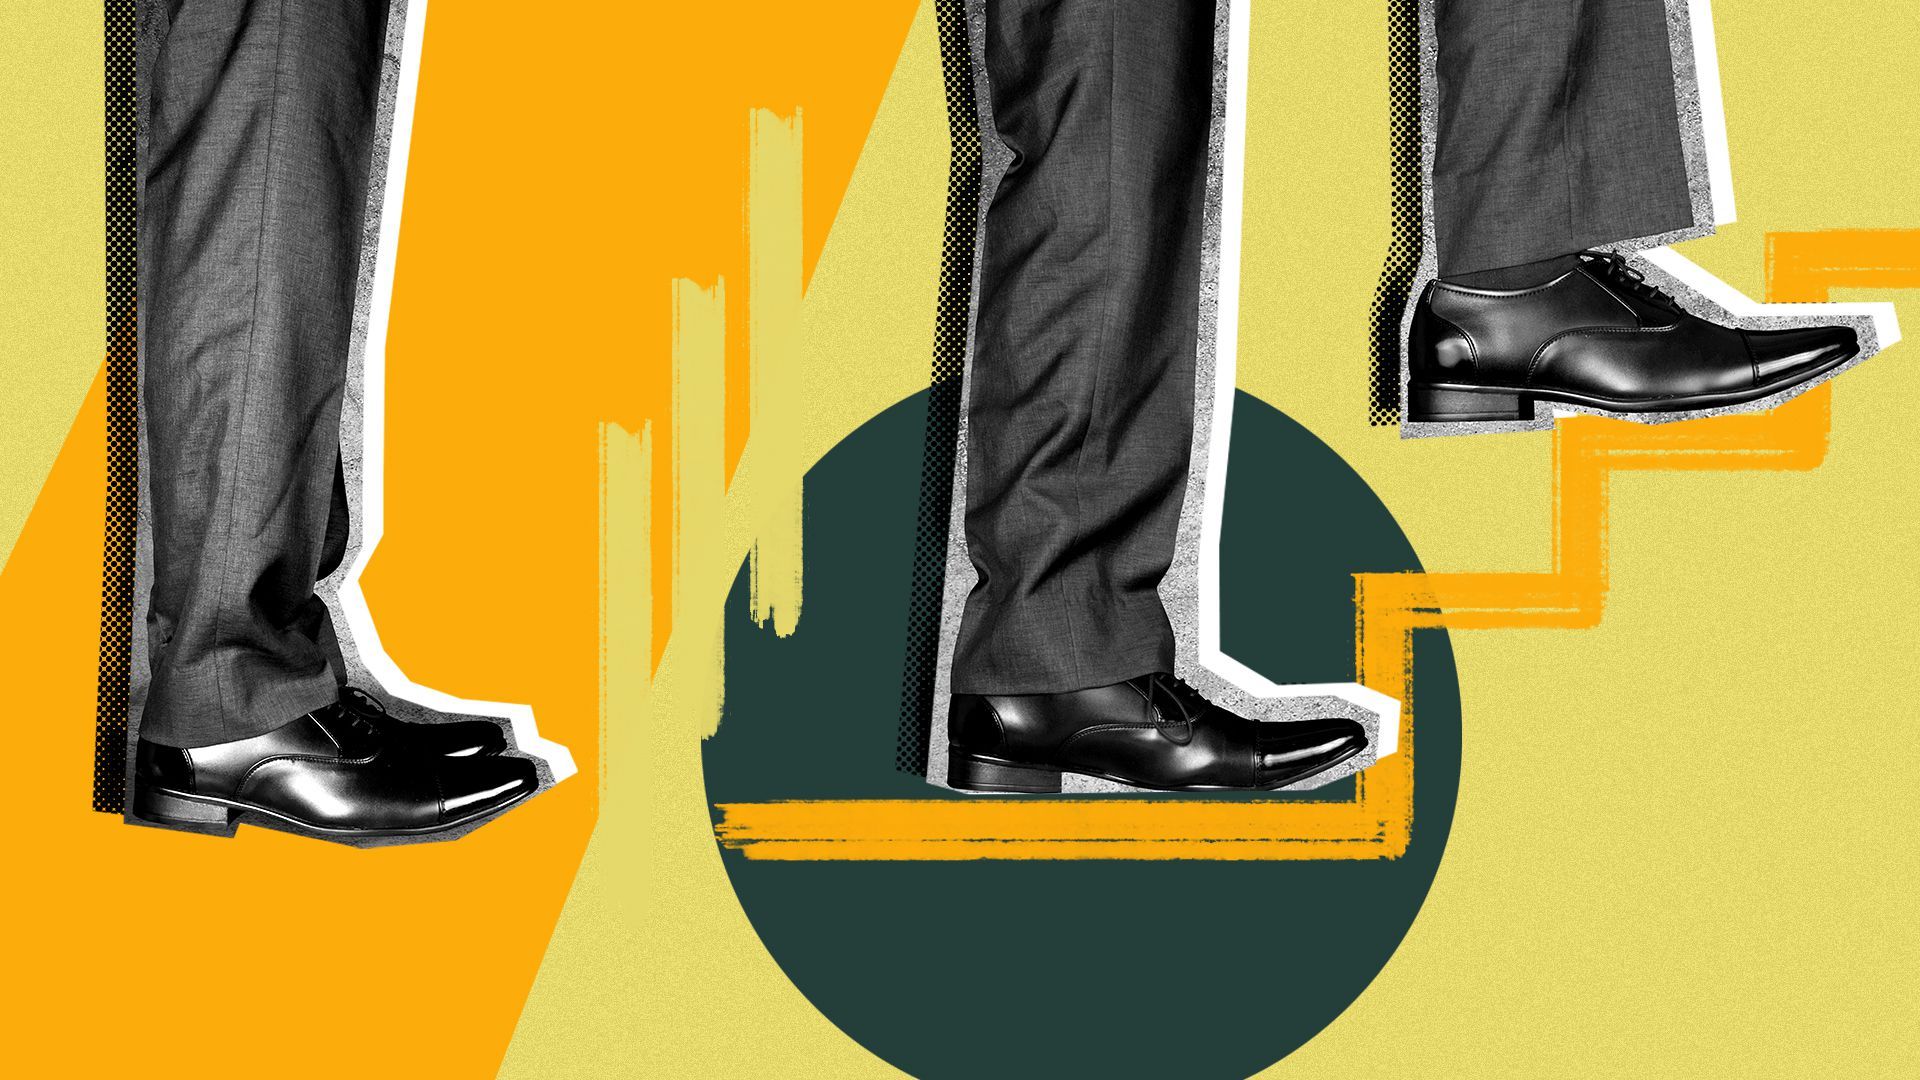 Illustration collage of legs in business attire standing still and another pair climbing stairs